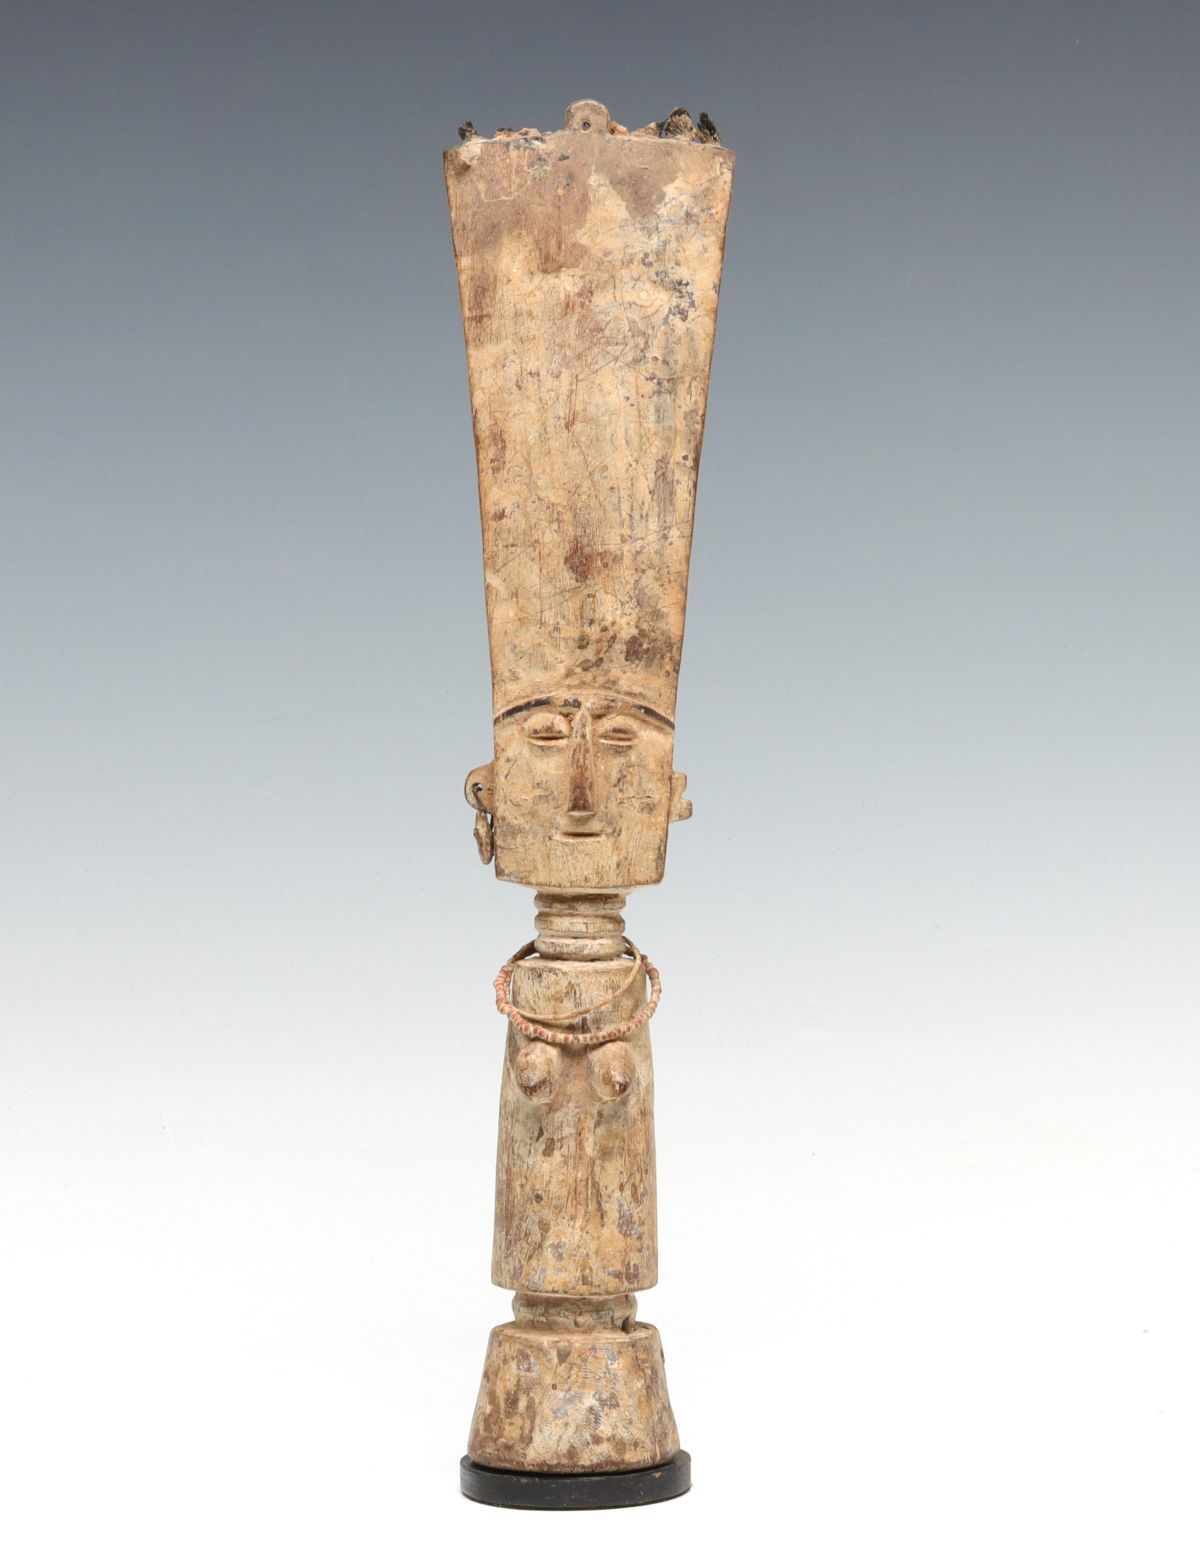 A CARVED FERTILITY FIGURE ATTRIBUTED FANTE PEOPLE